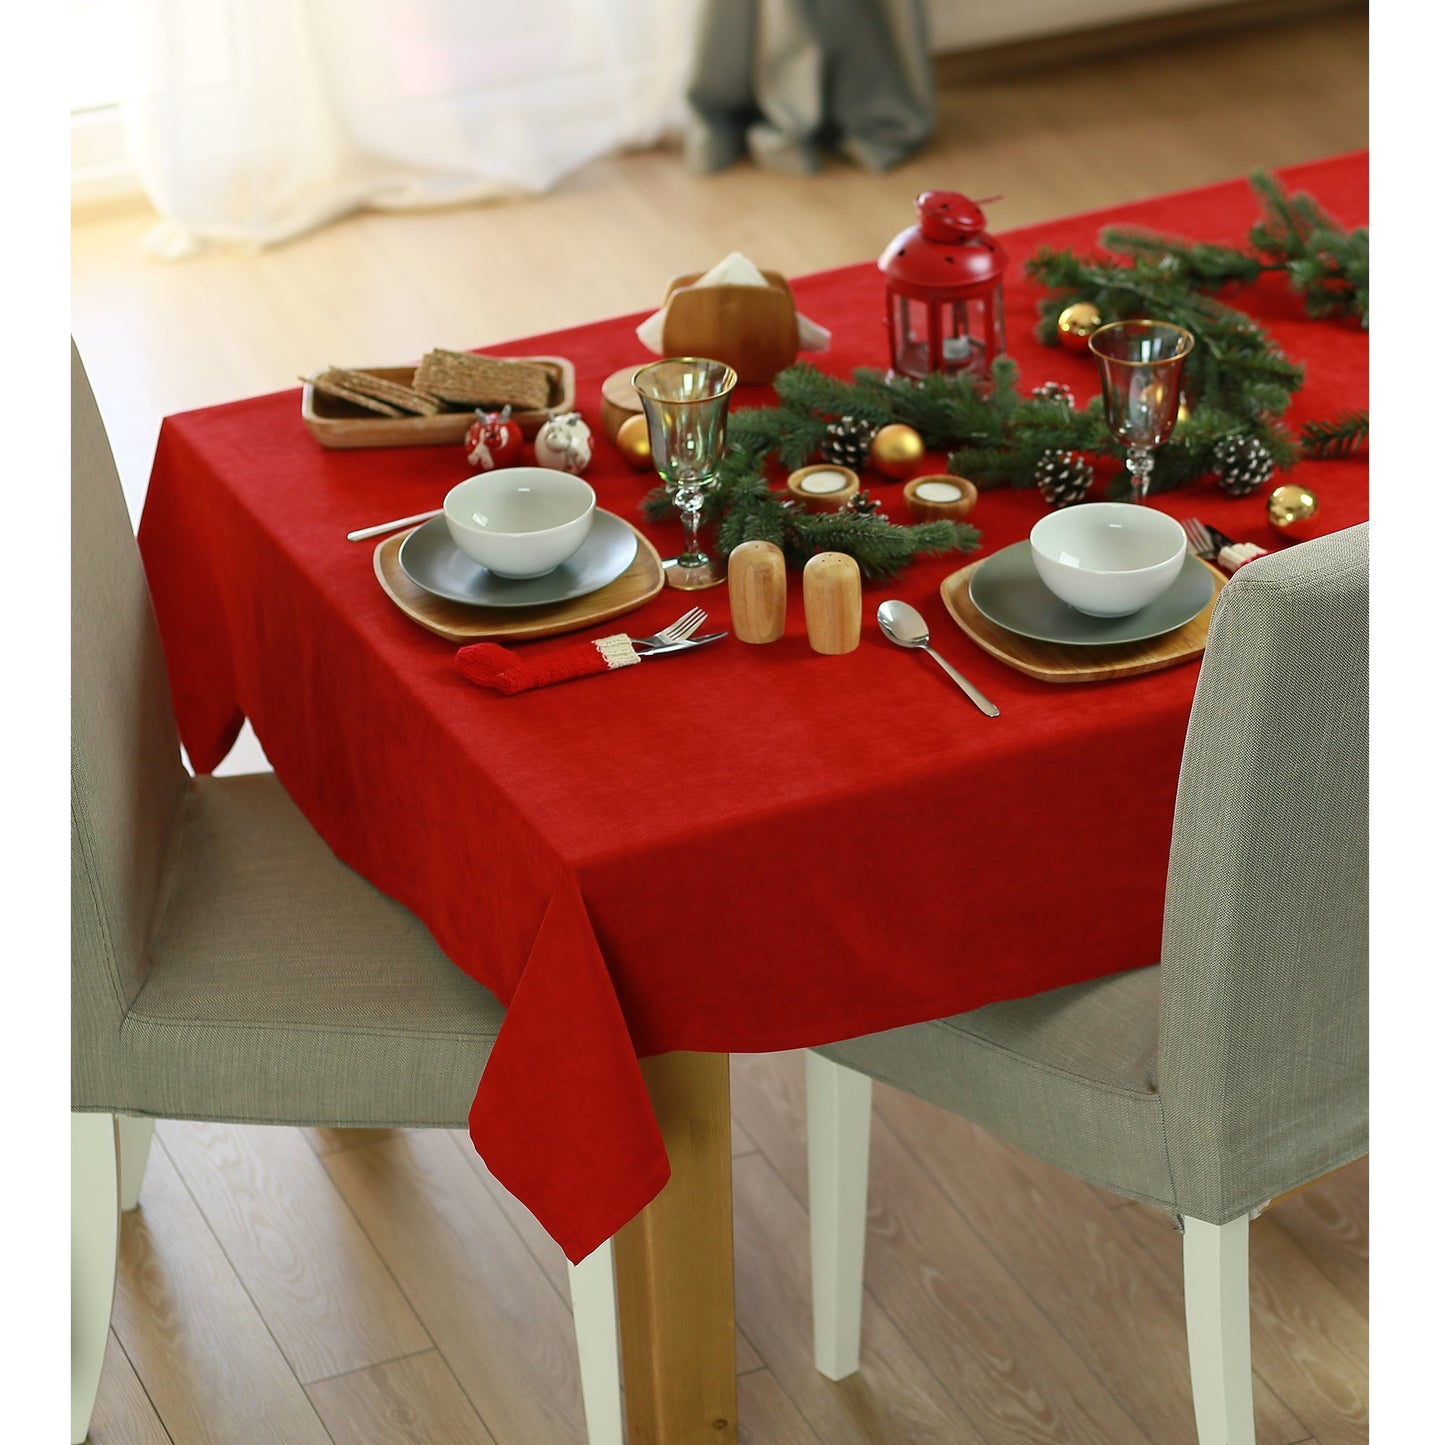 55" Merry Christmas Square Tablecloth in Red